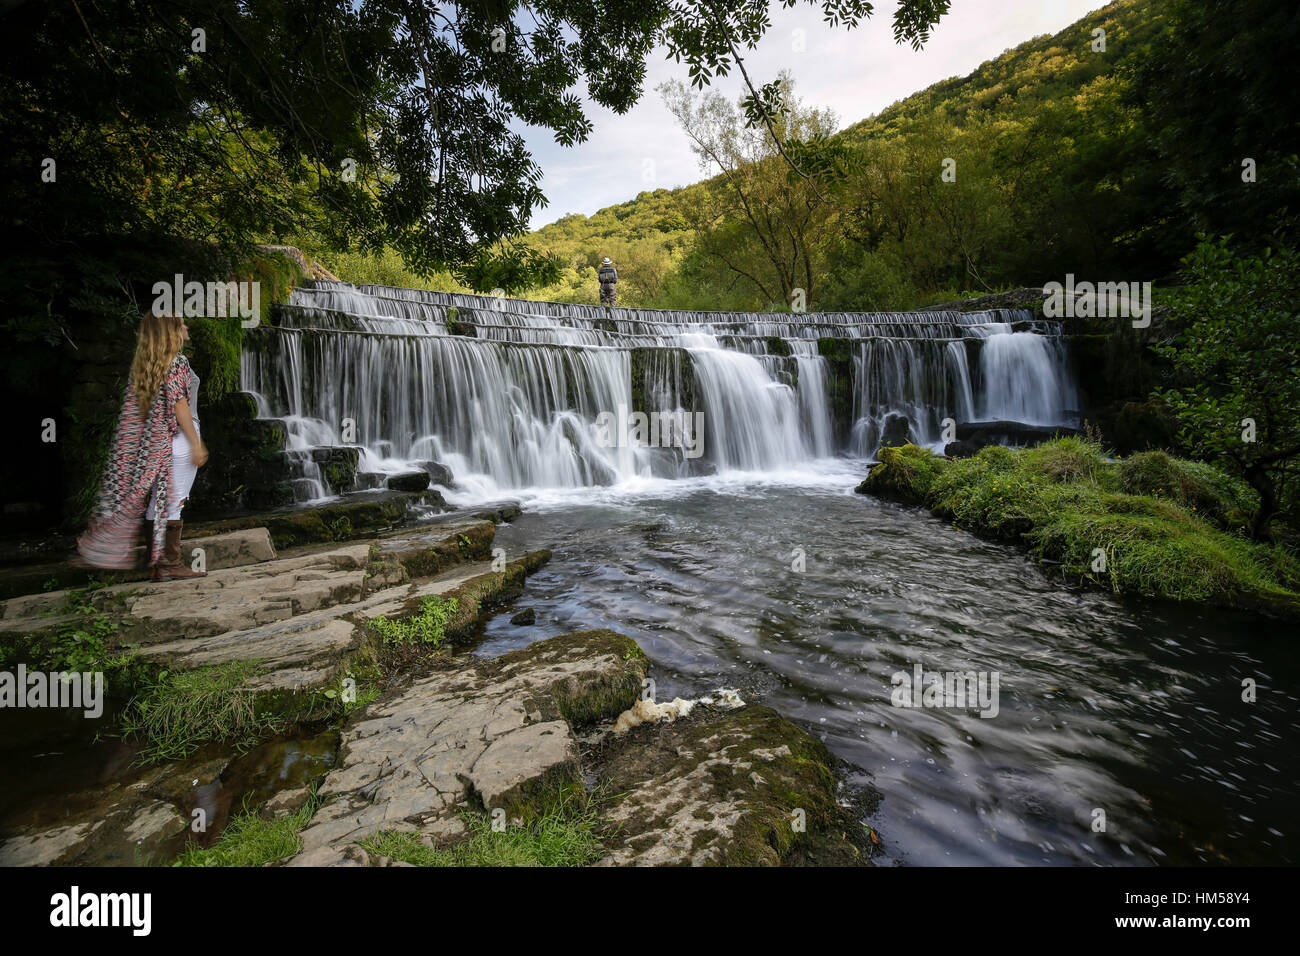 Waterfall on the River Wye in Derbyshire England Stock Photo